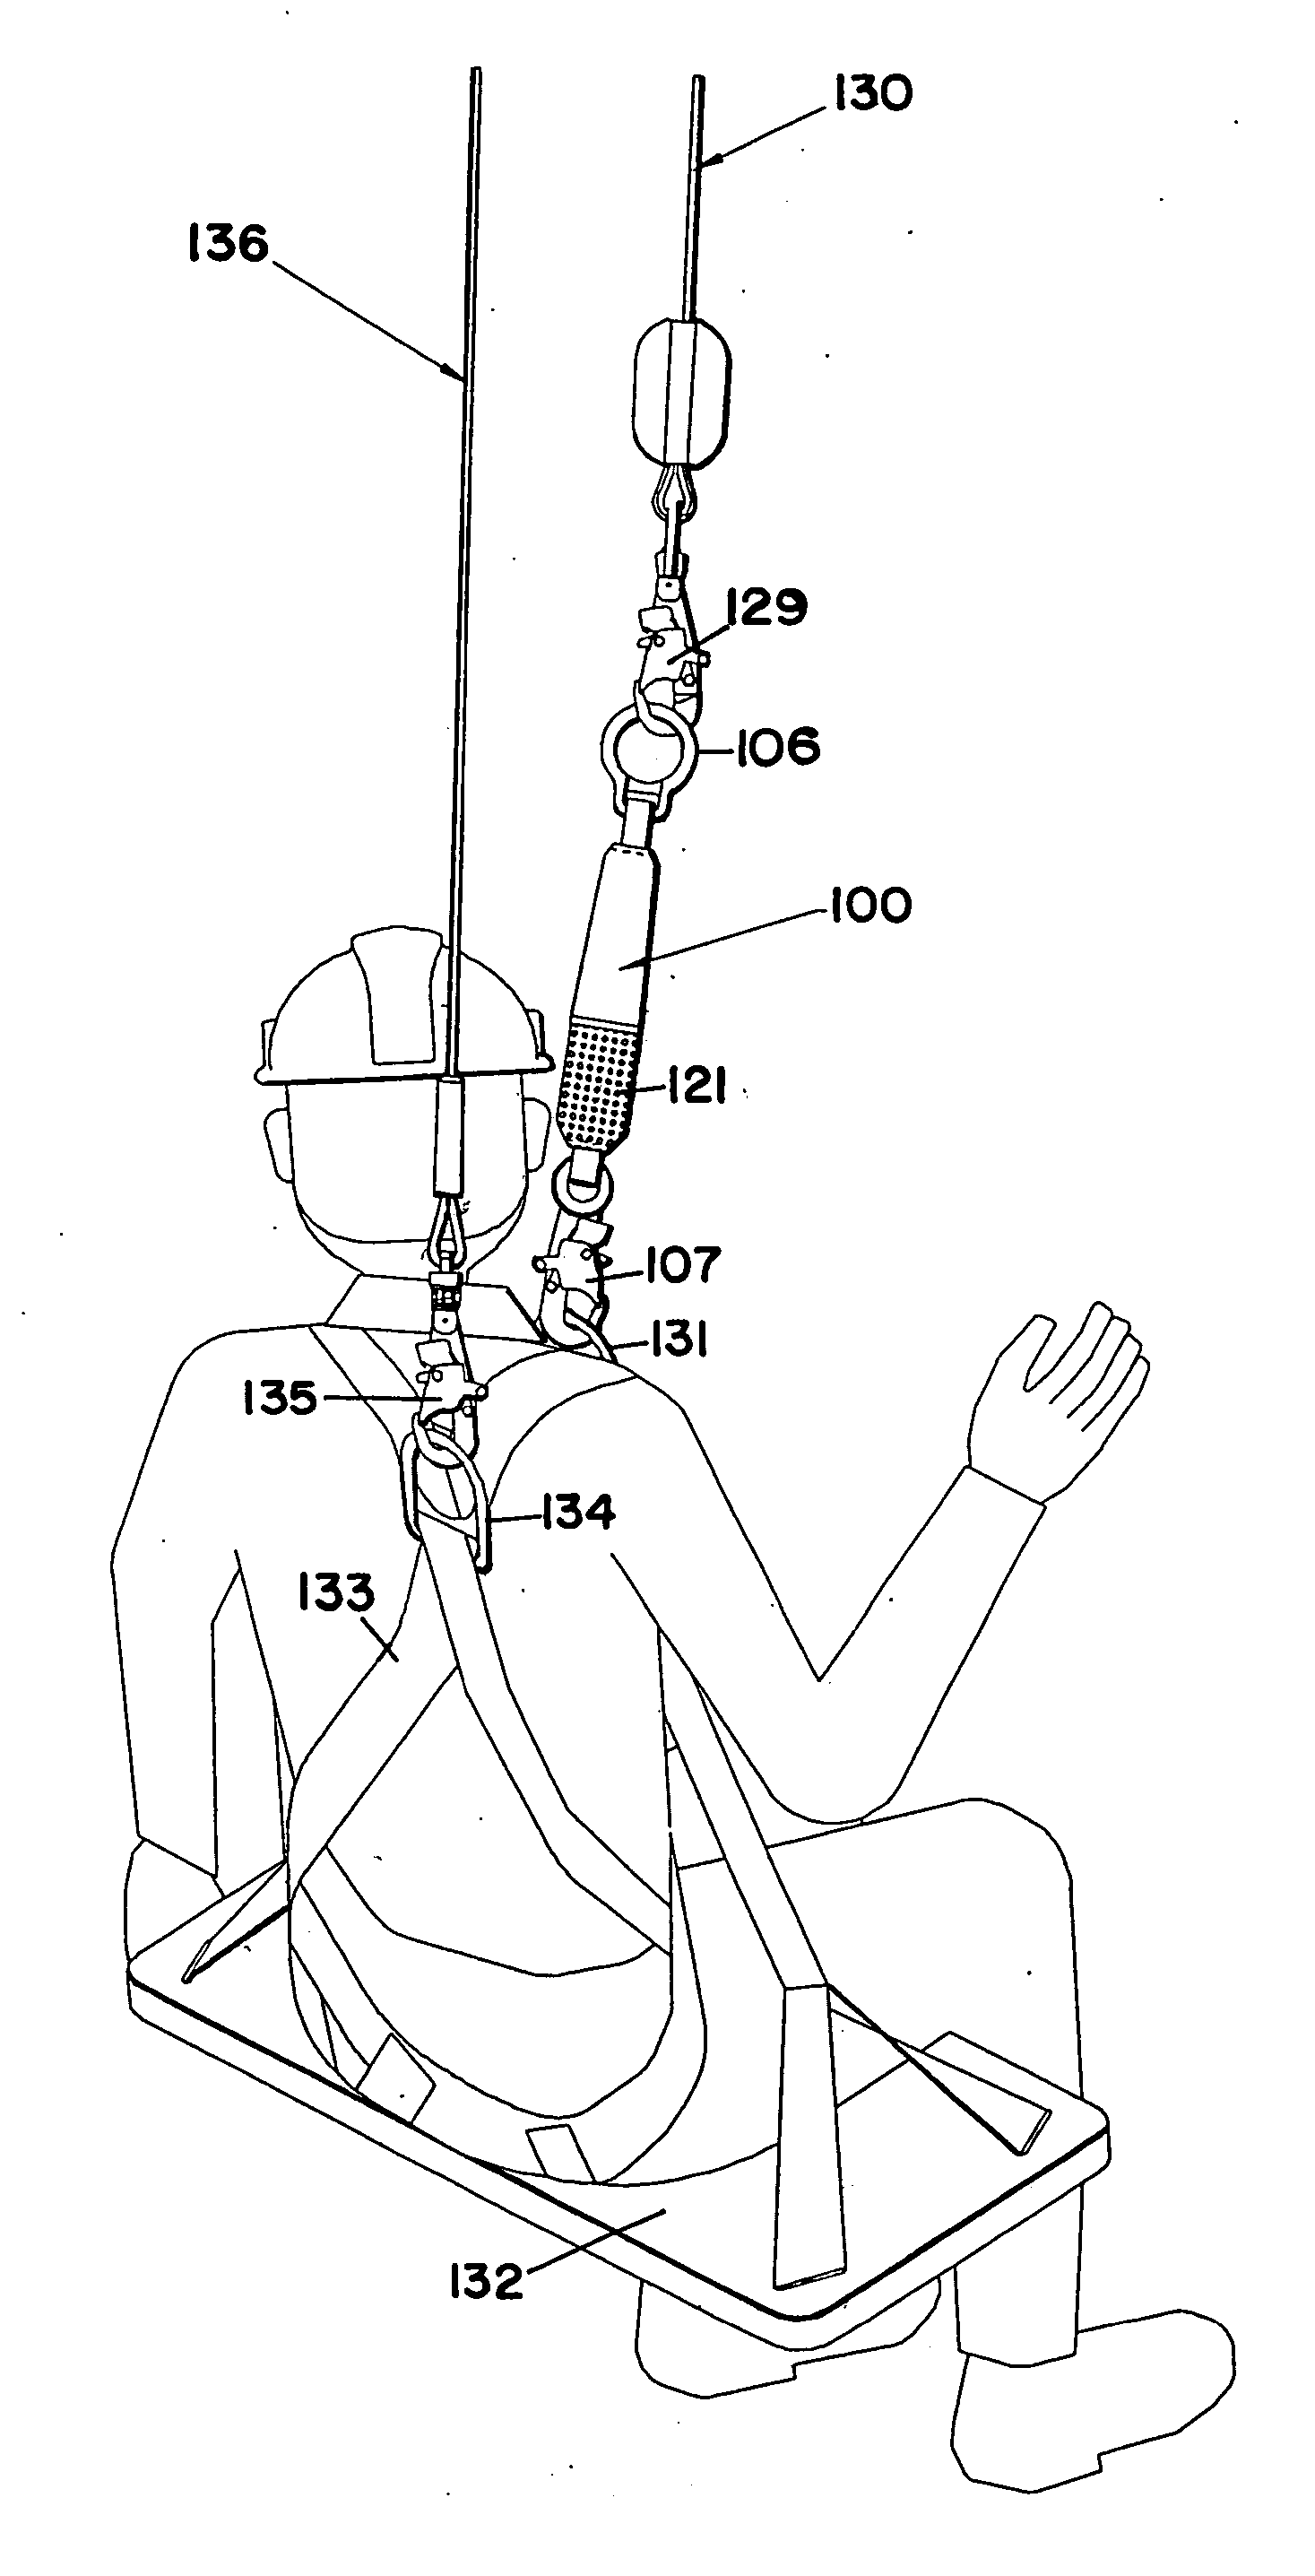 Alarm device for use with fall protection equipment